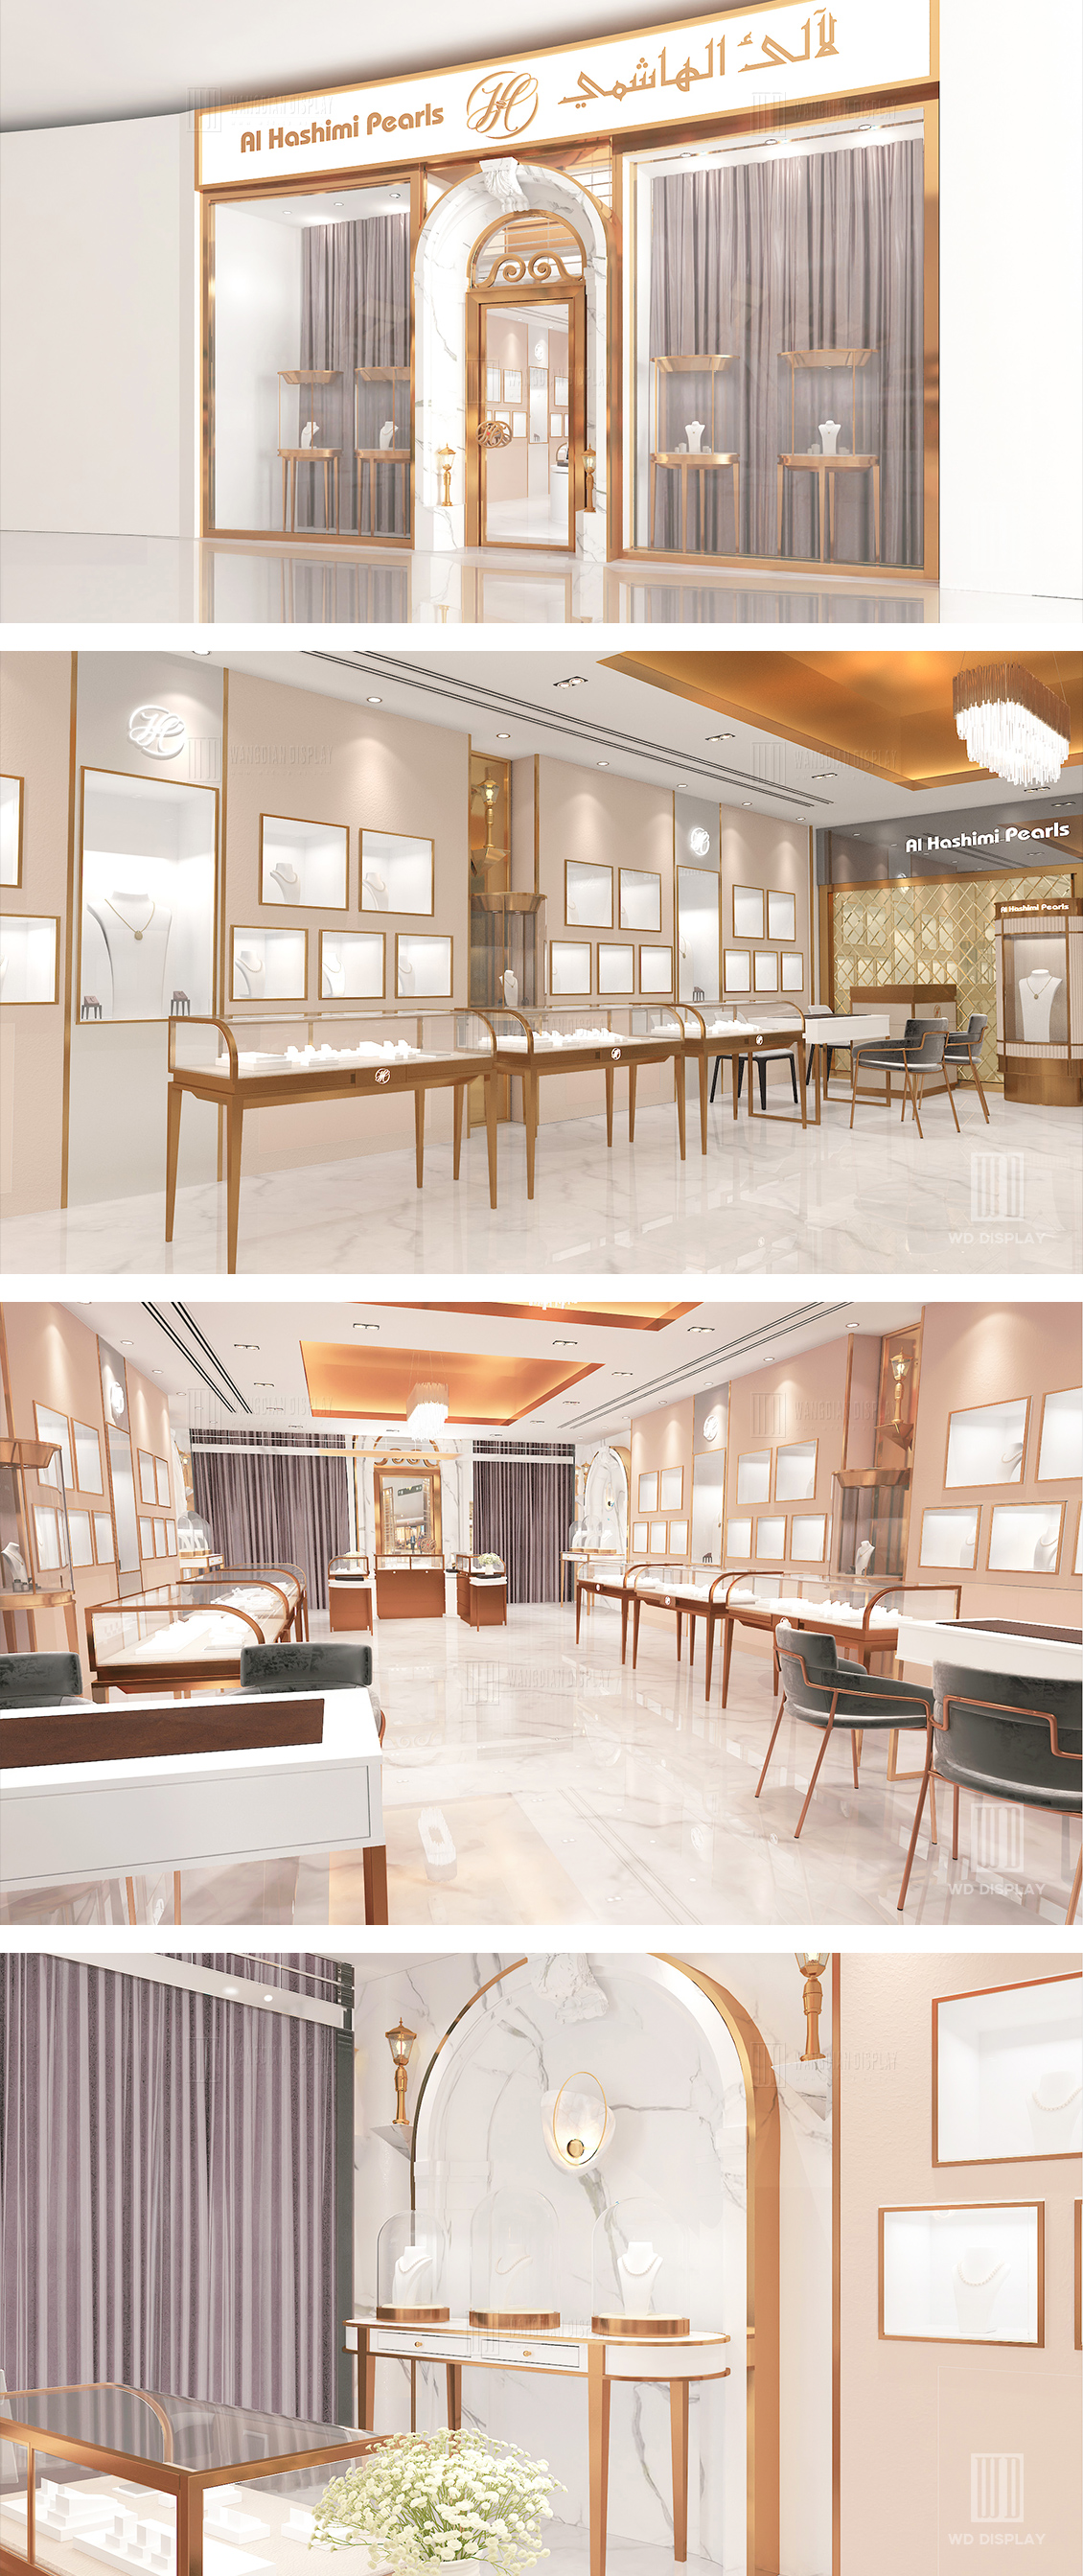 High-end jewelry store design in Bahrain